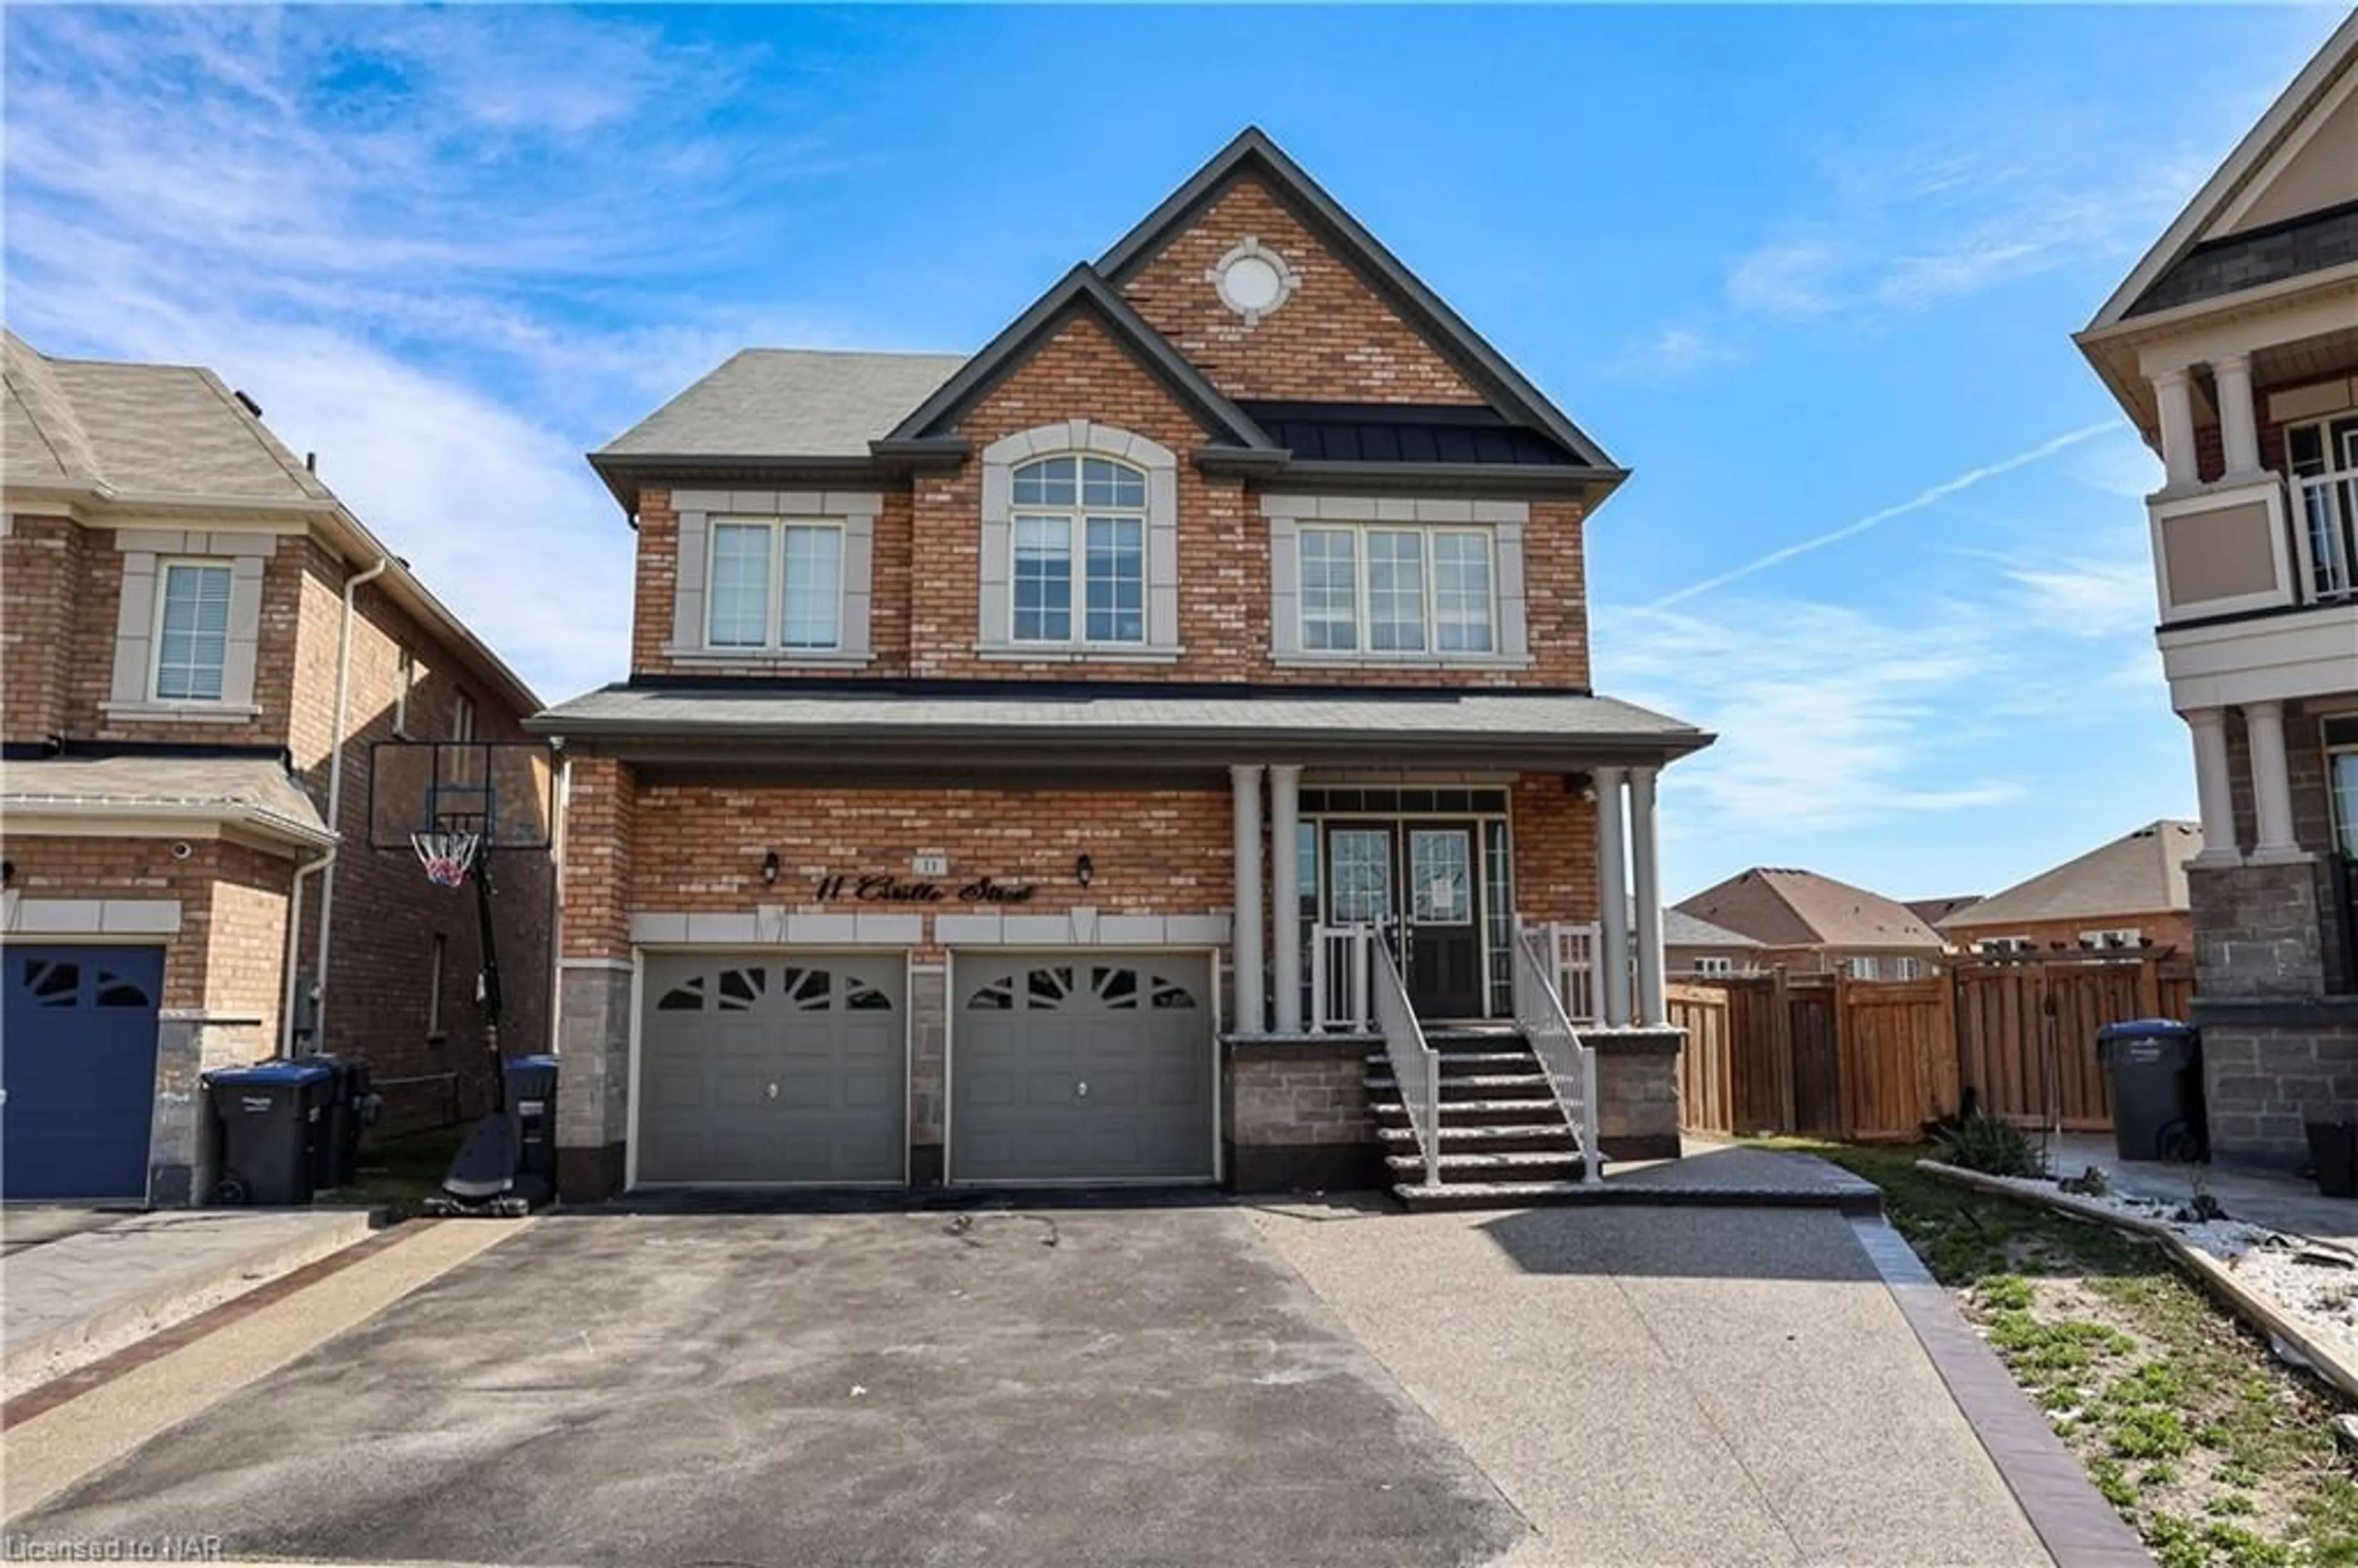 Frontside or backside of a home for 11 Cirillo St, Brampton Ontario L6X 3C4